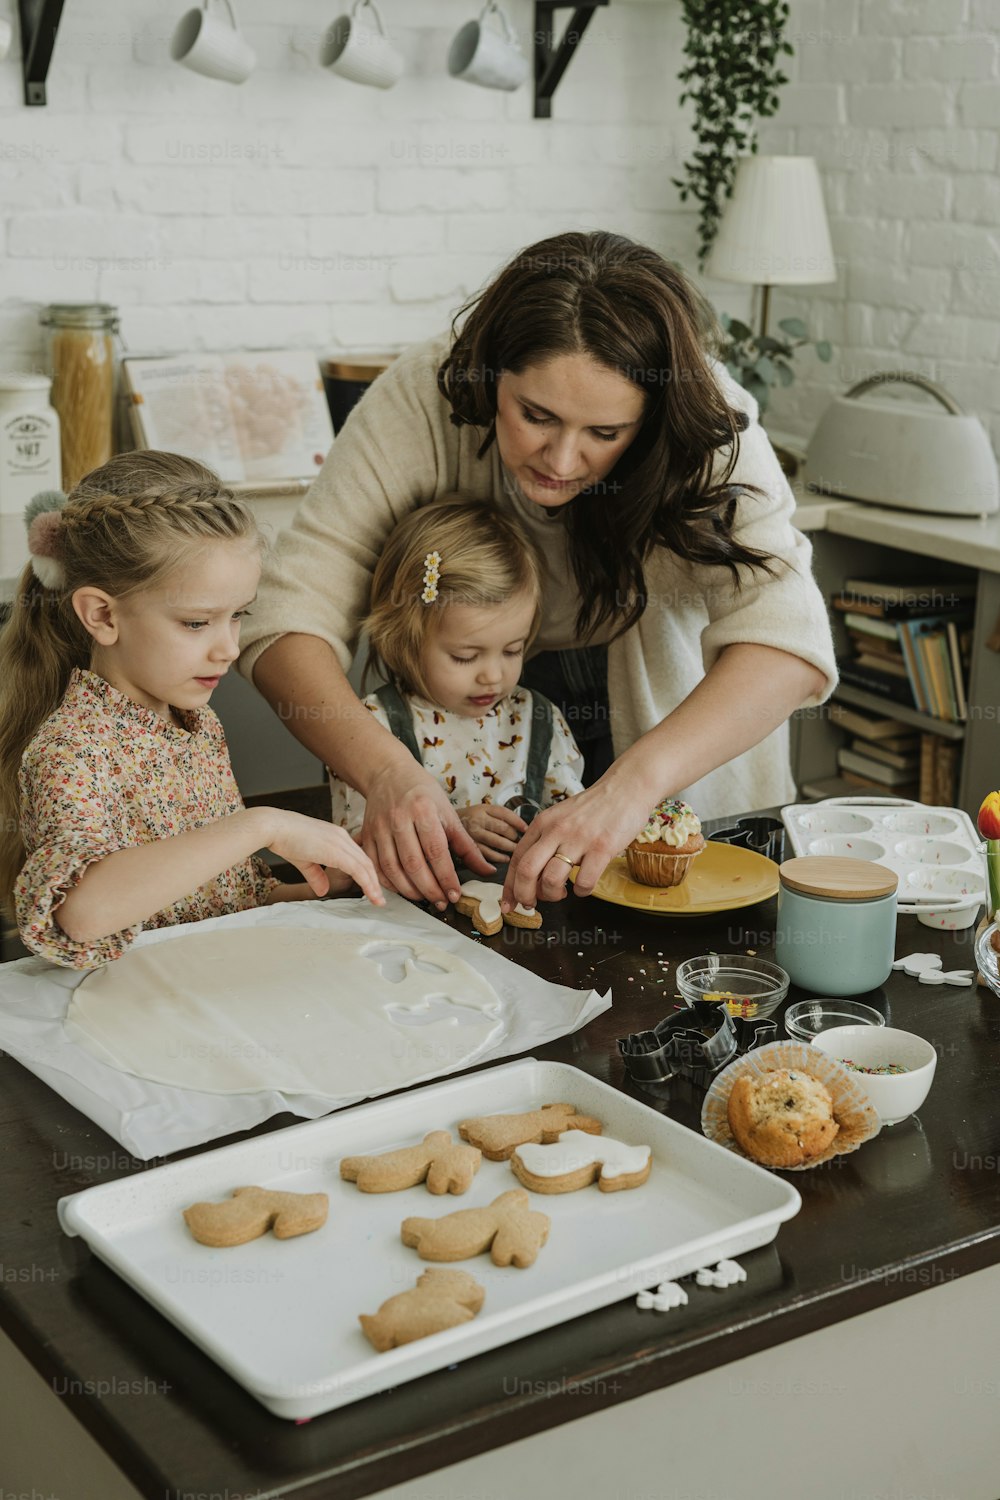 a woman and two young girls making cookies